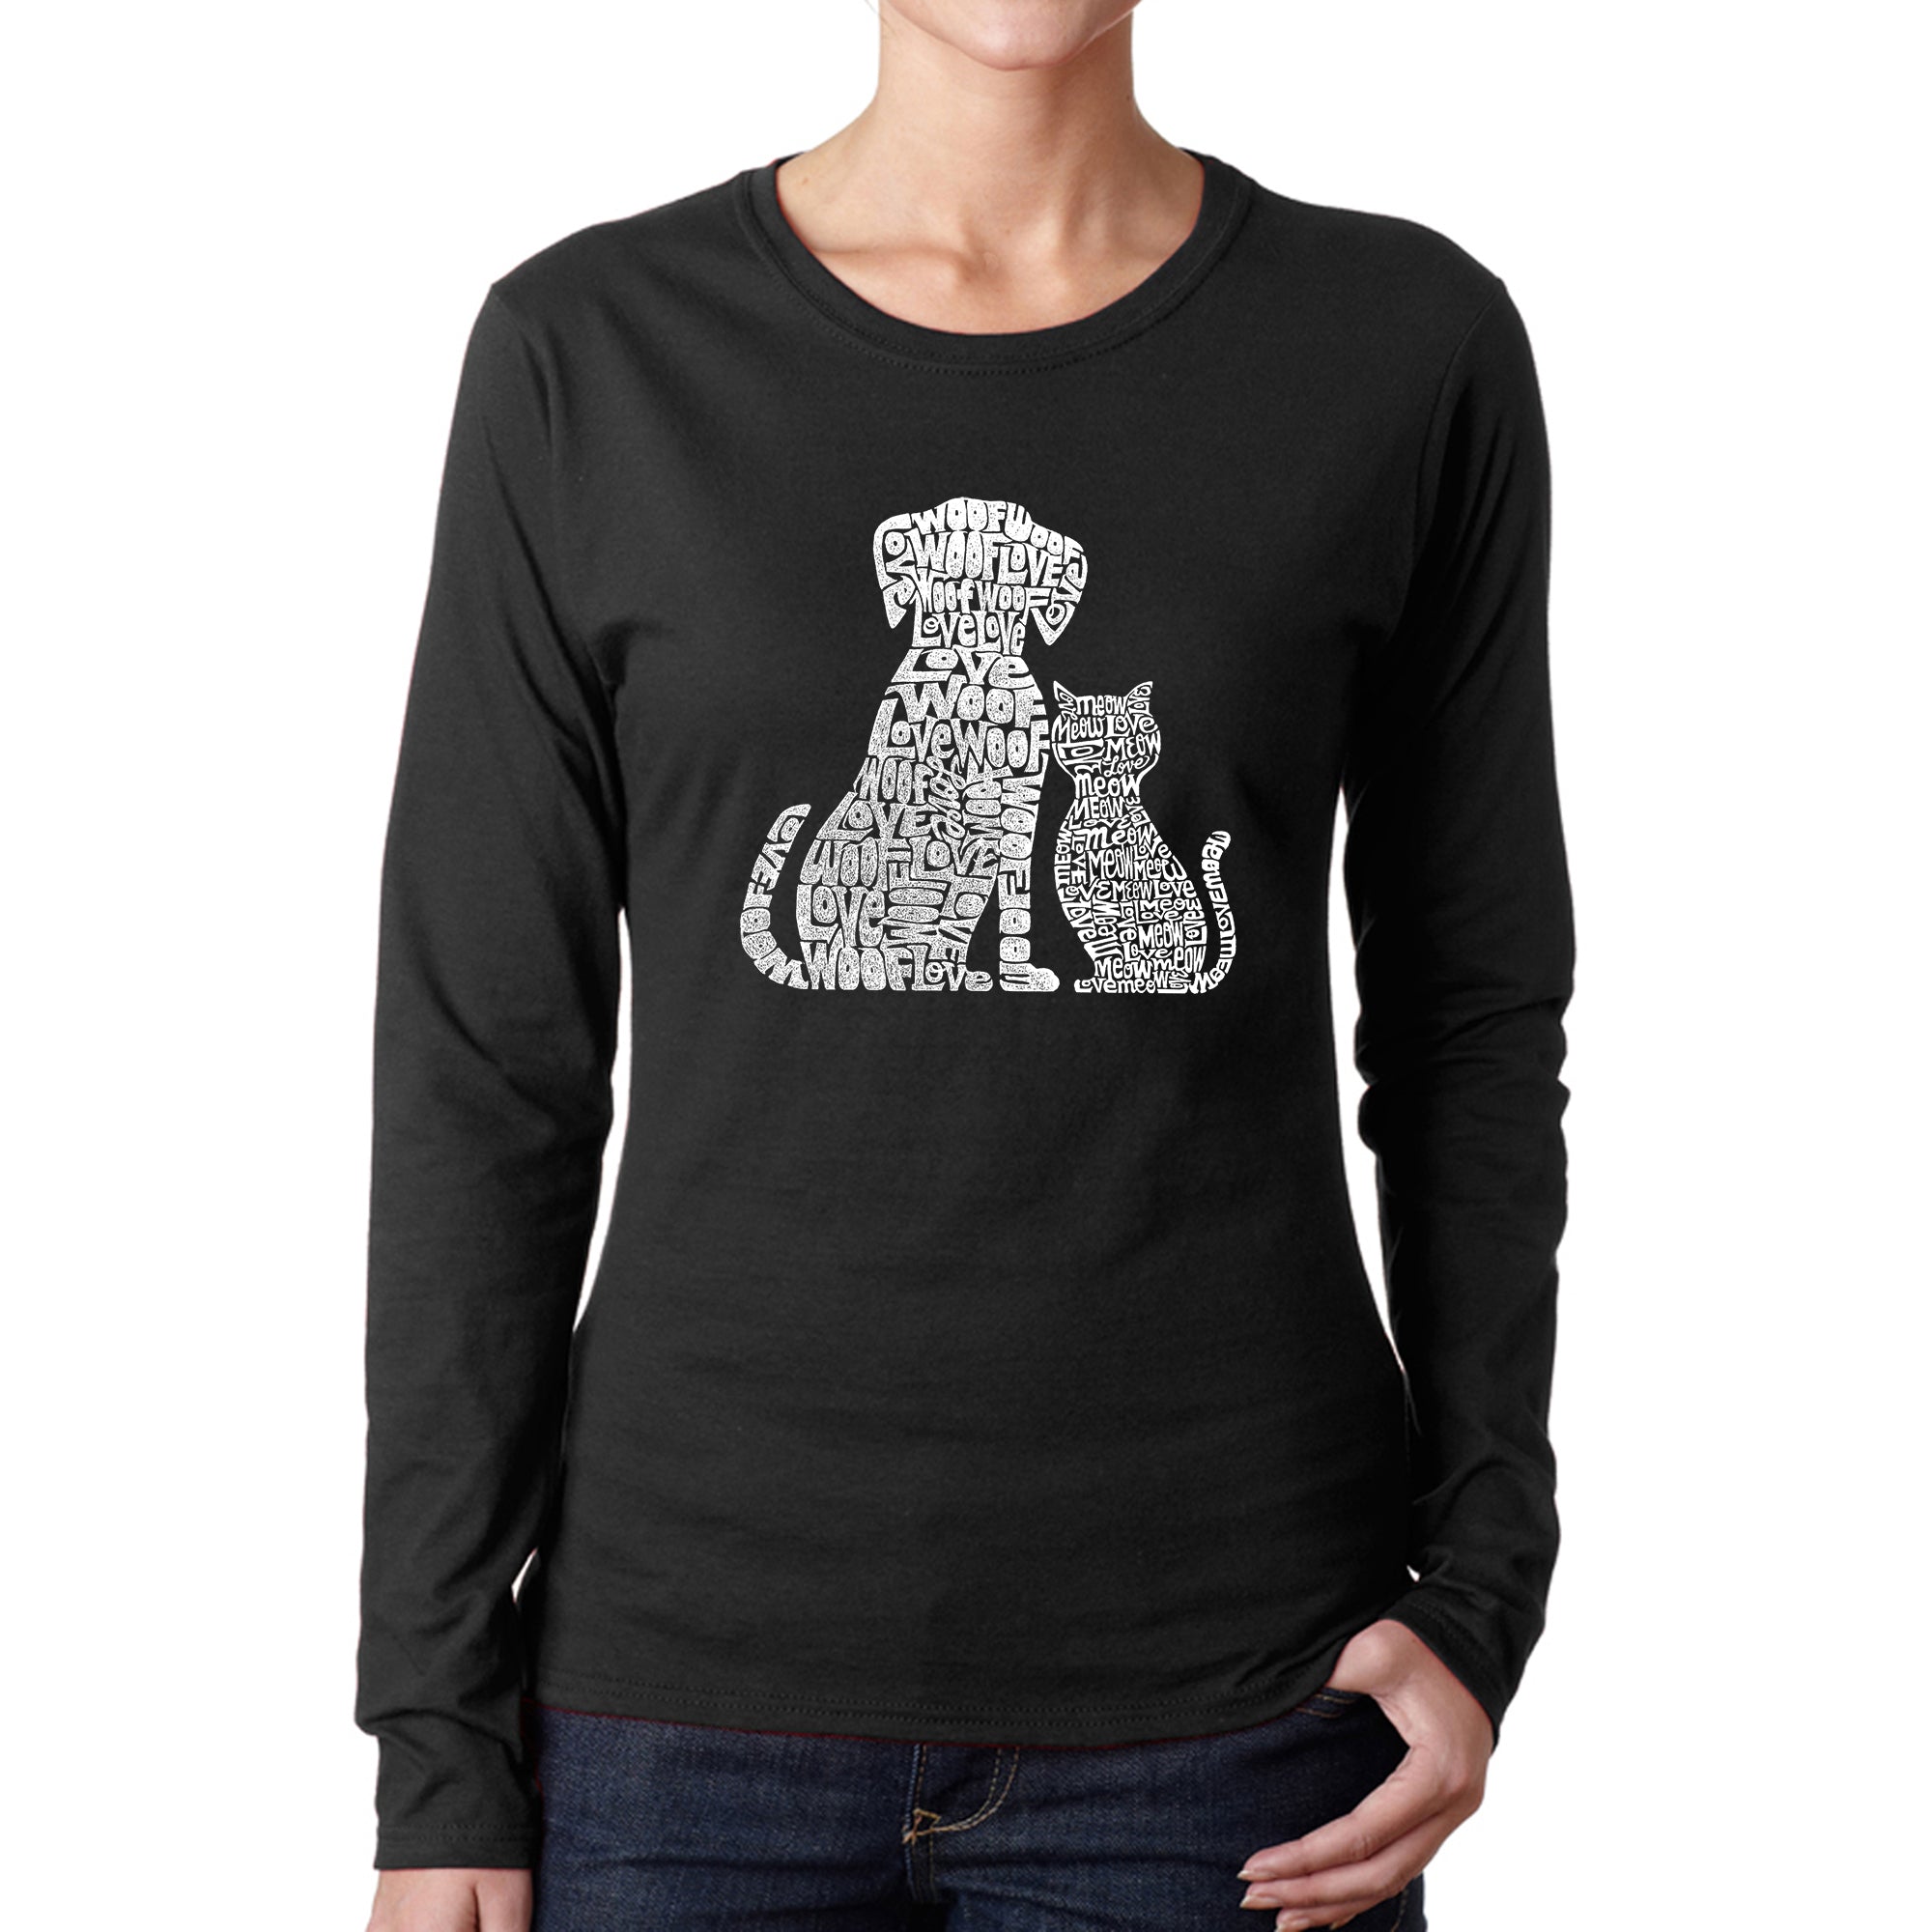 Dogs And Cats - Women's Word Art Long Sleeve T-Shirt - Black - Small